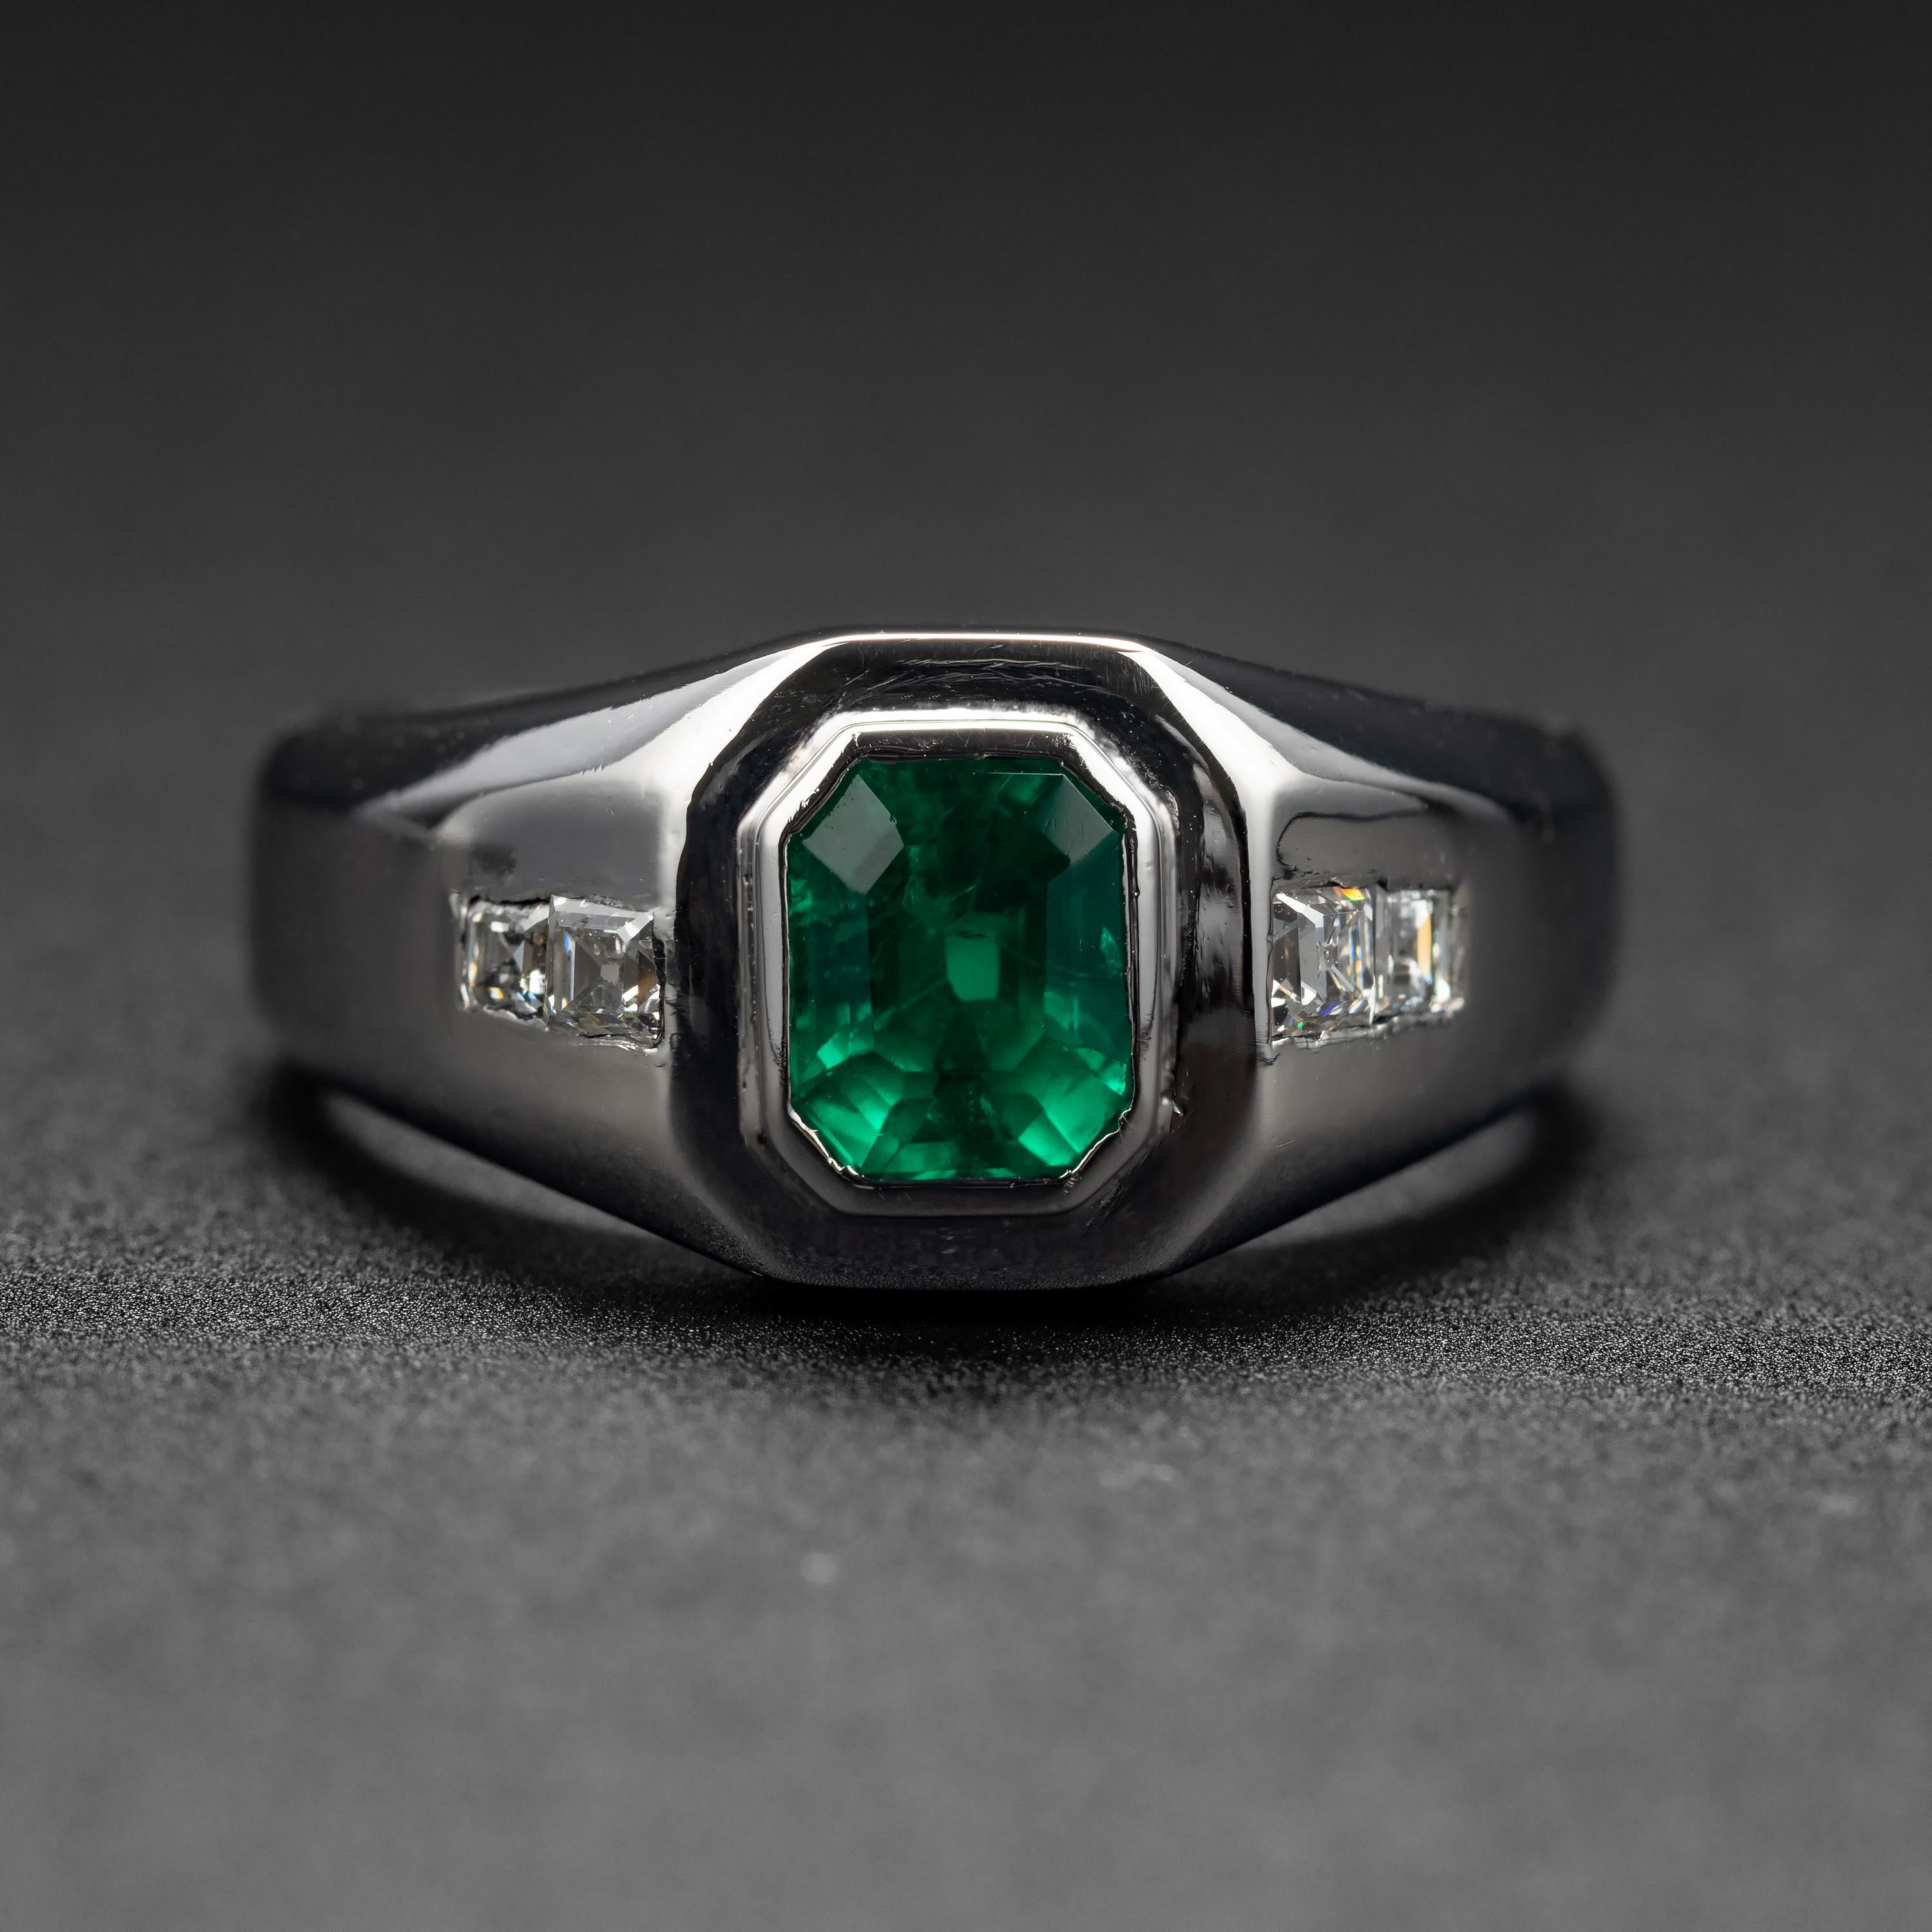 Emerald doesn't come any finer than what you see here in this vintage men's ring. This dense platinum hand-fabricated ring from the mid-1990s features a one-carat emerald-cut emerald of the finest color; a vividly saturated bluish-green that is